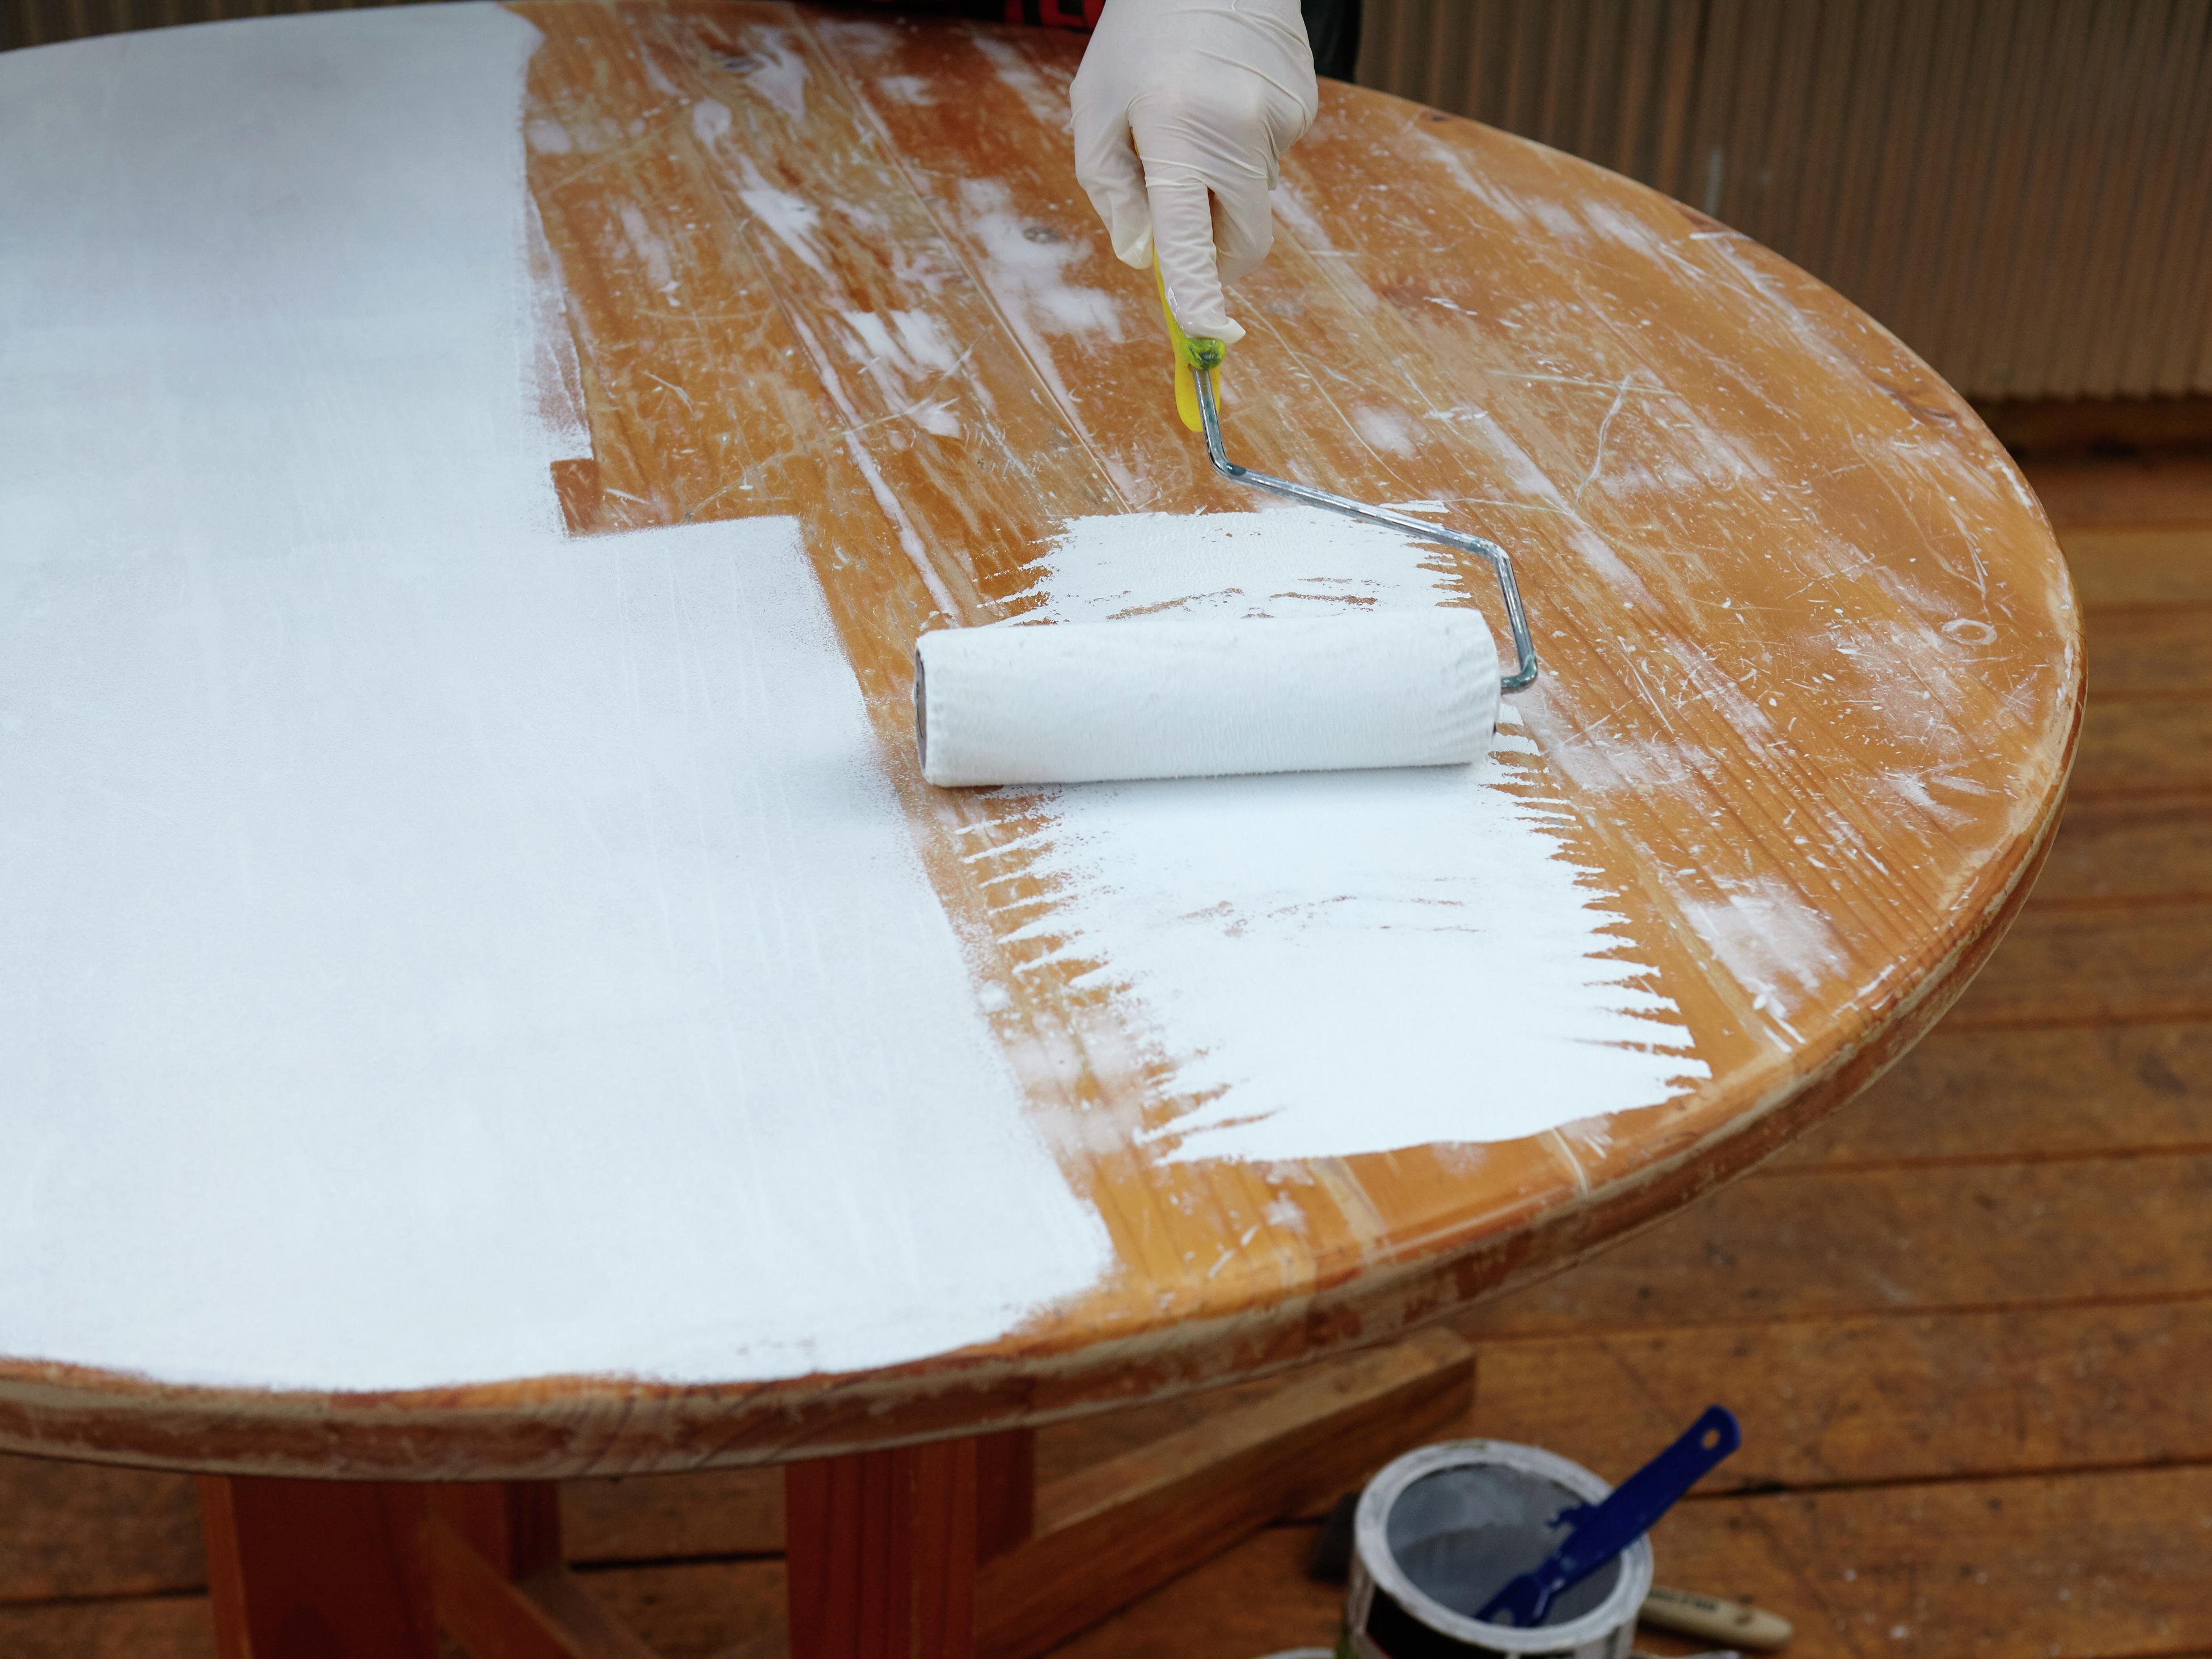 Enamel Paint for Wood: How to Apply Enamel Paint on Wooden Furniture?